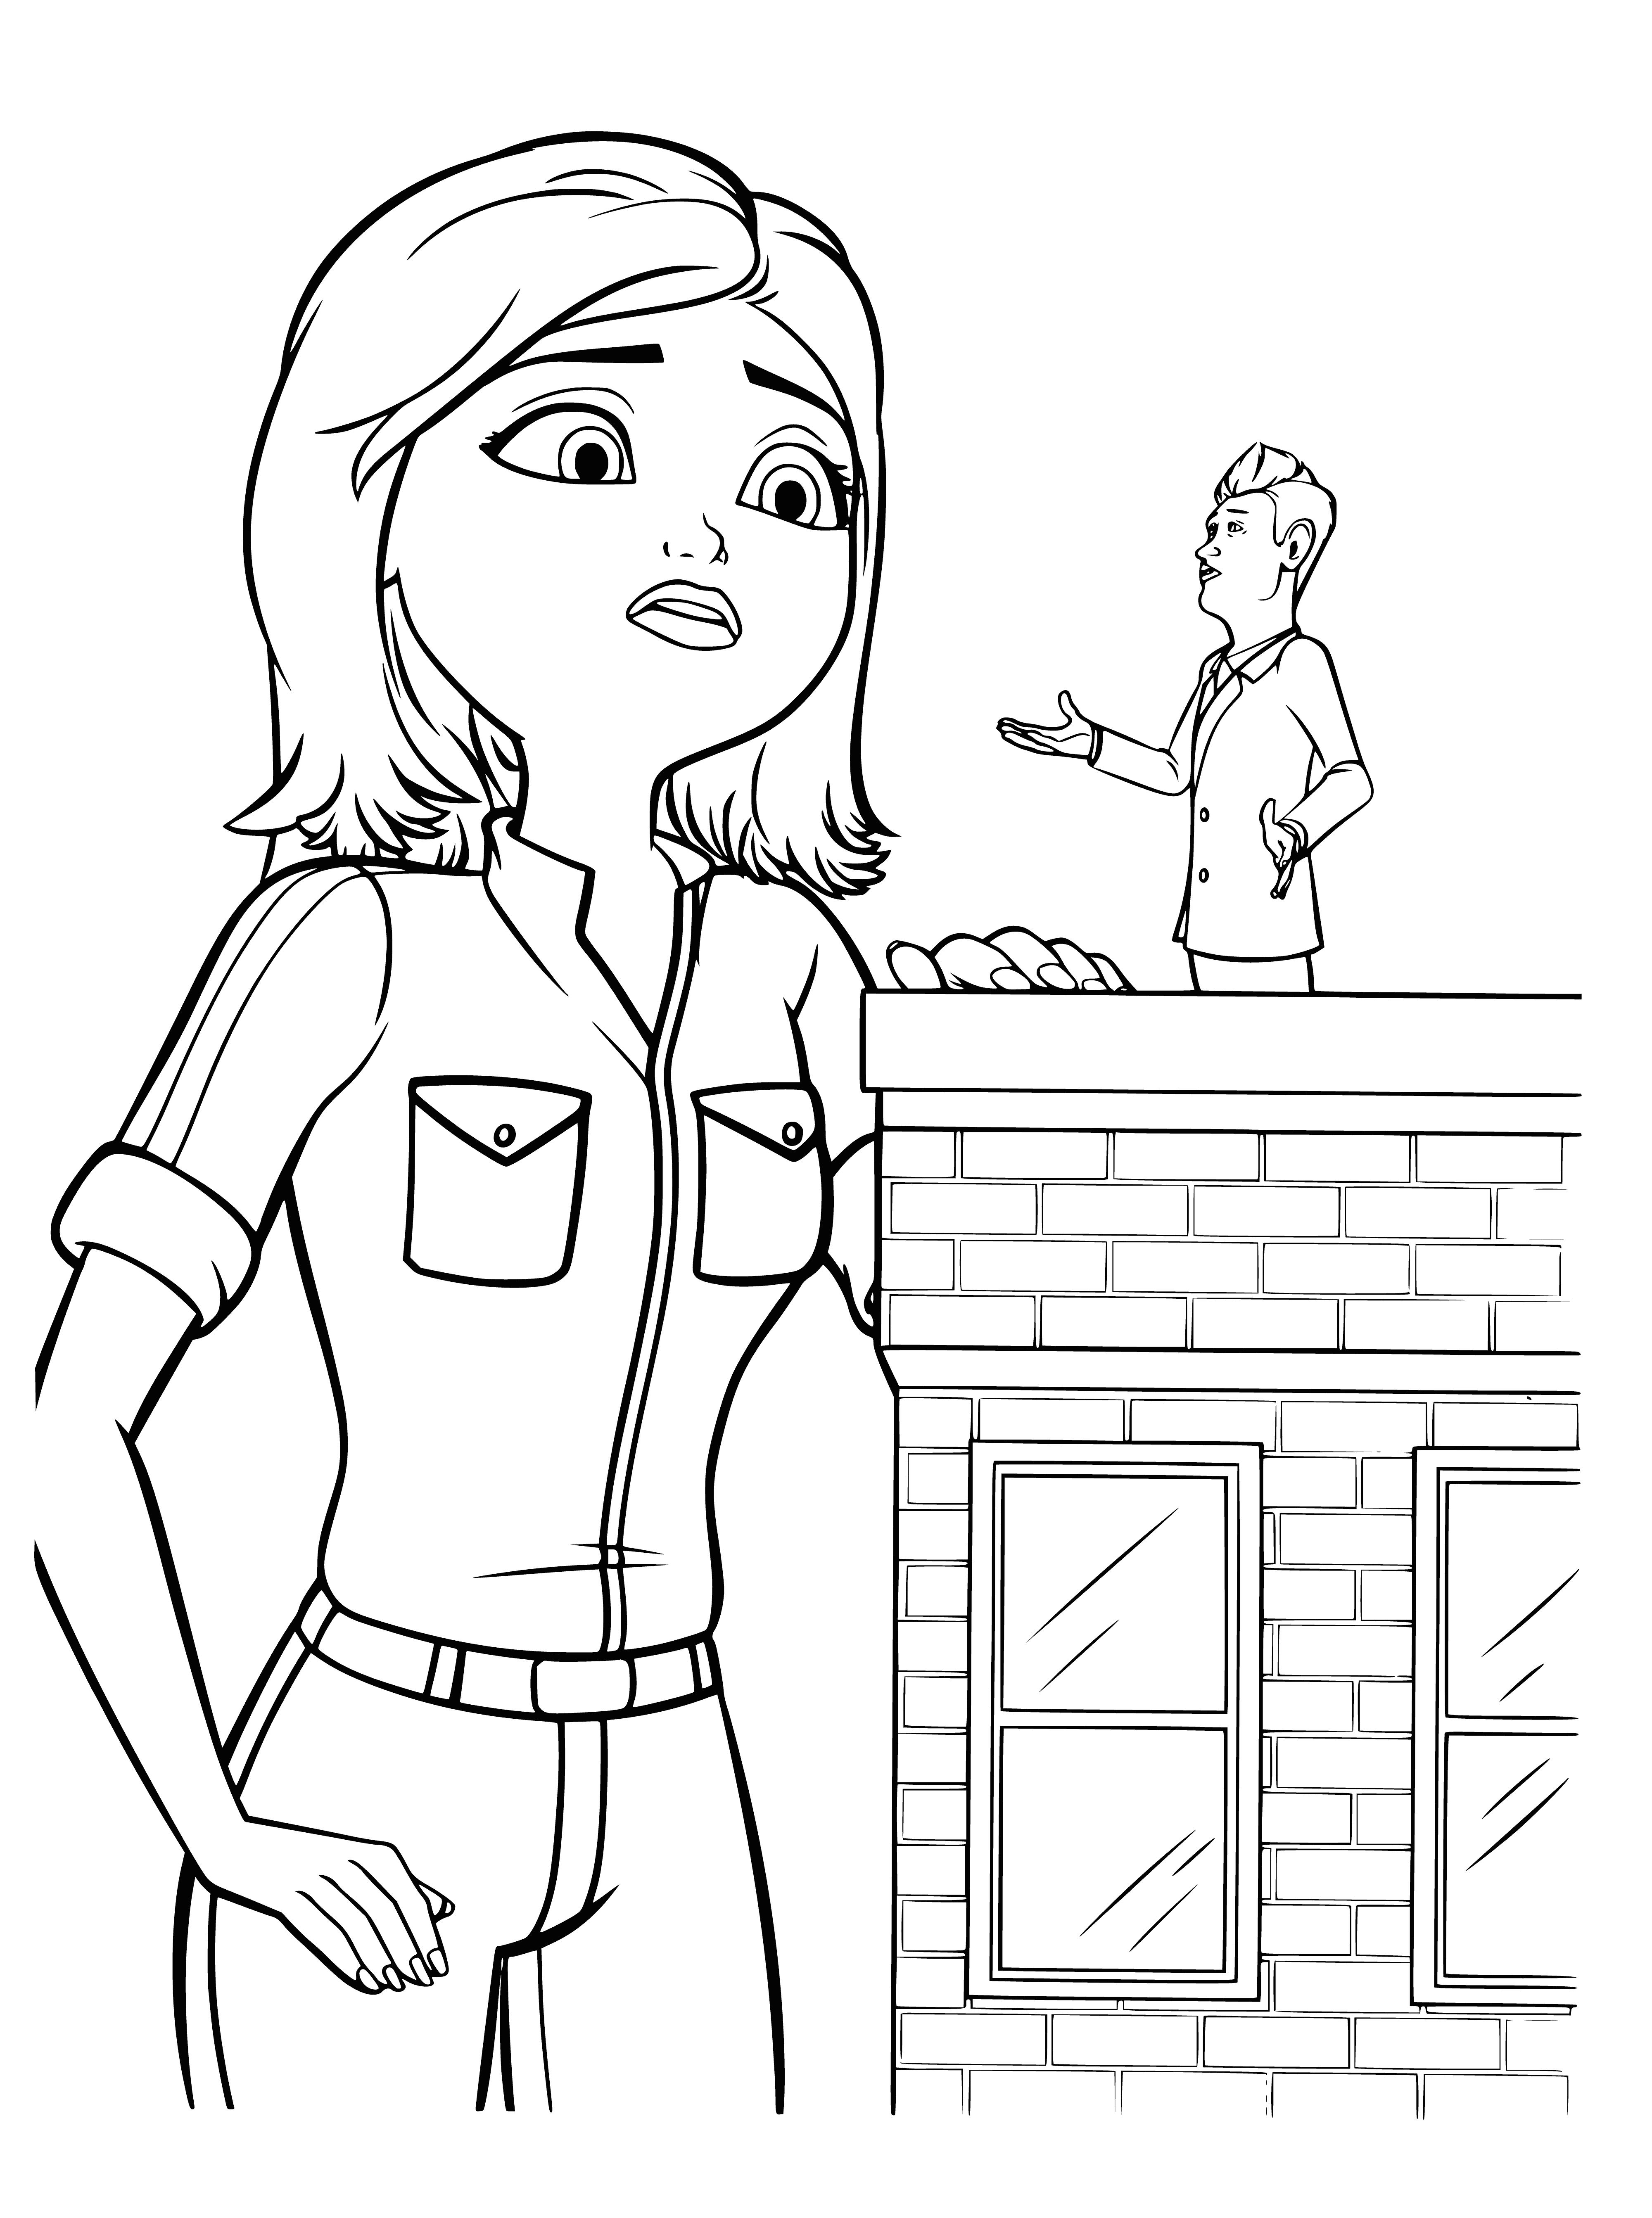 Susan and the groom coloring page